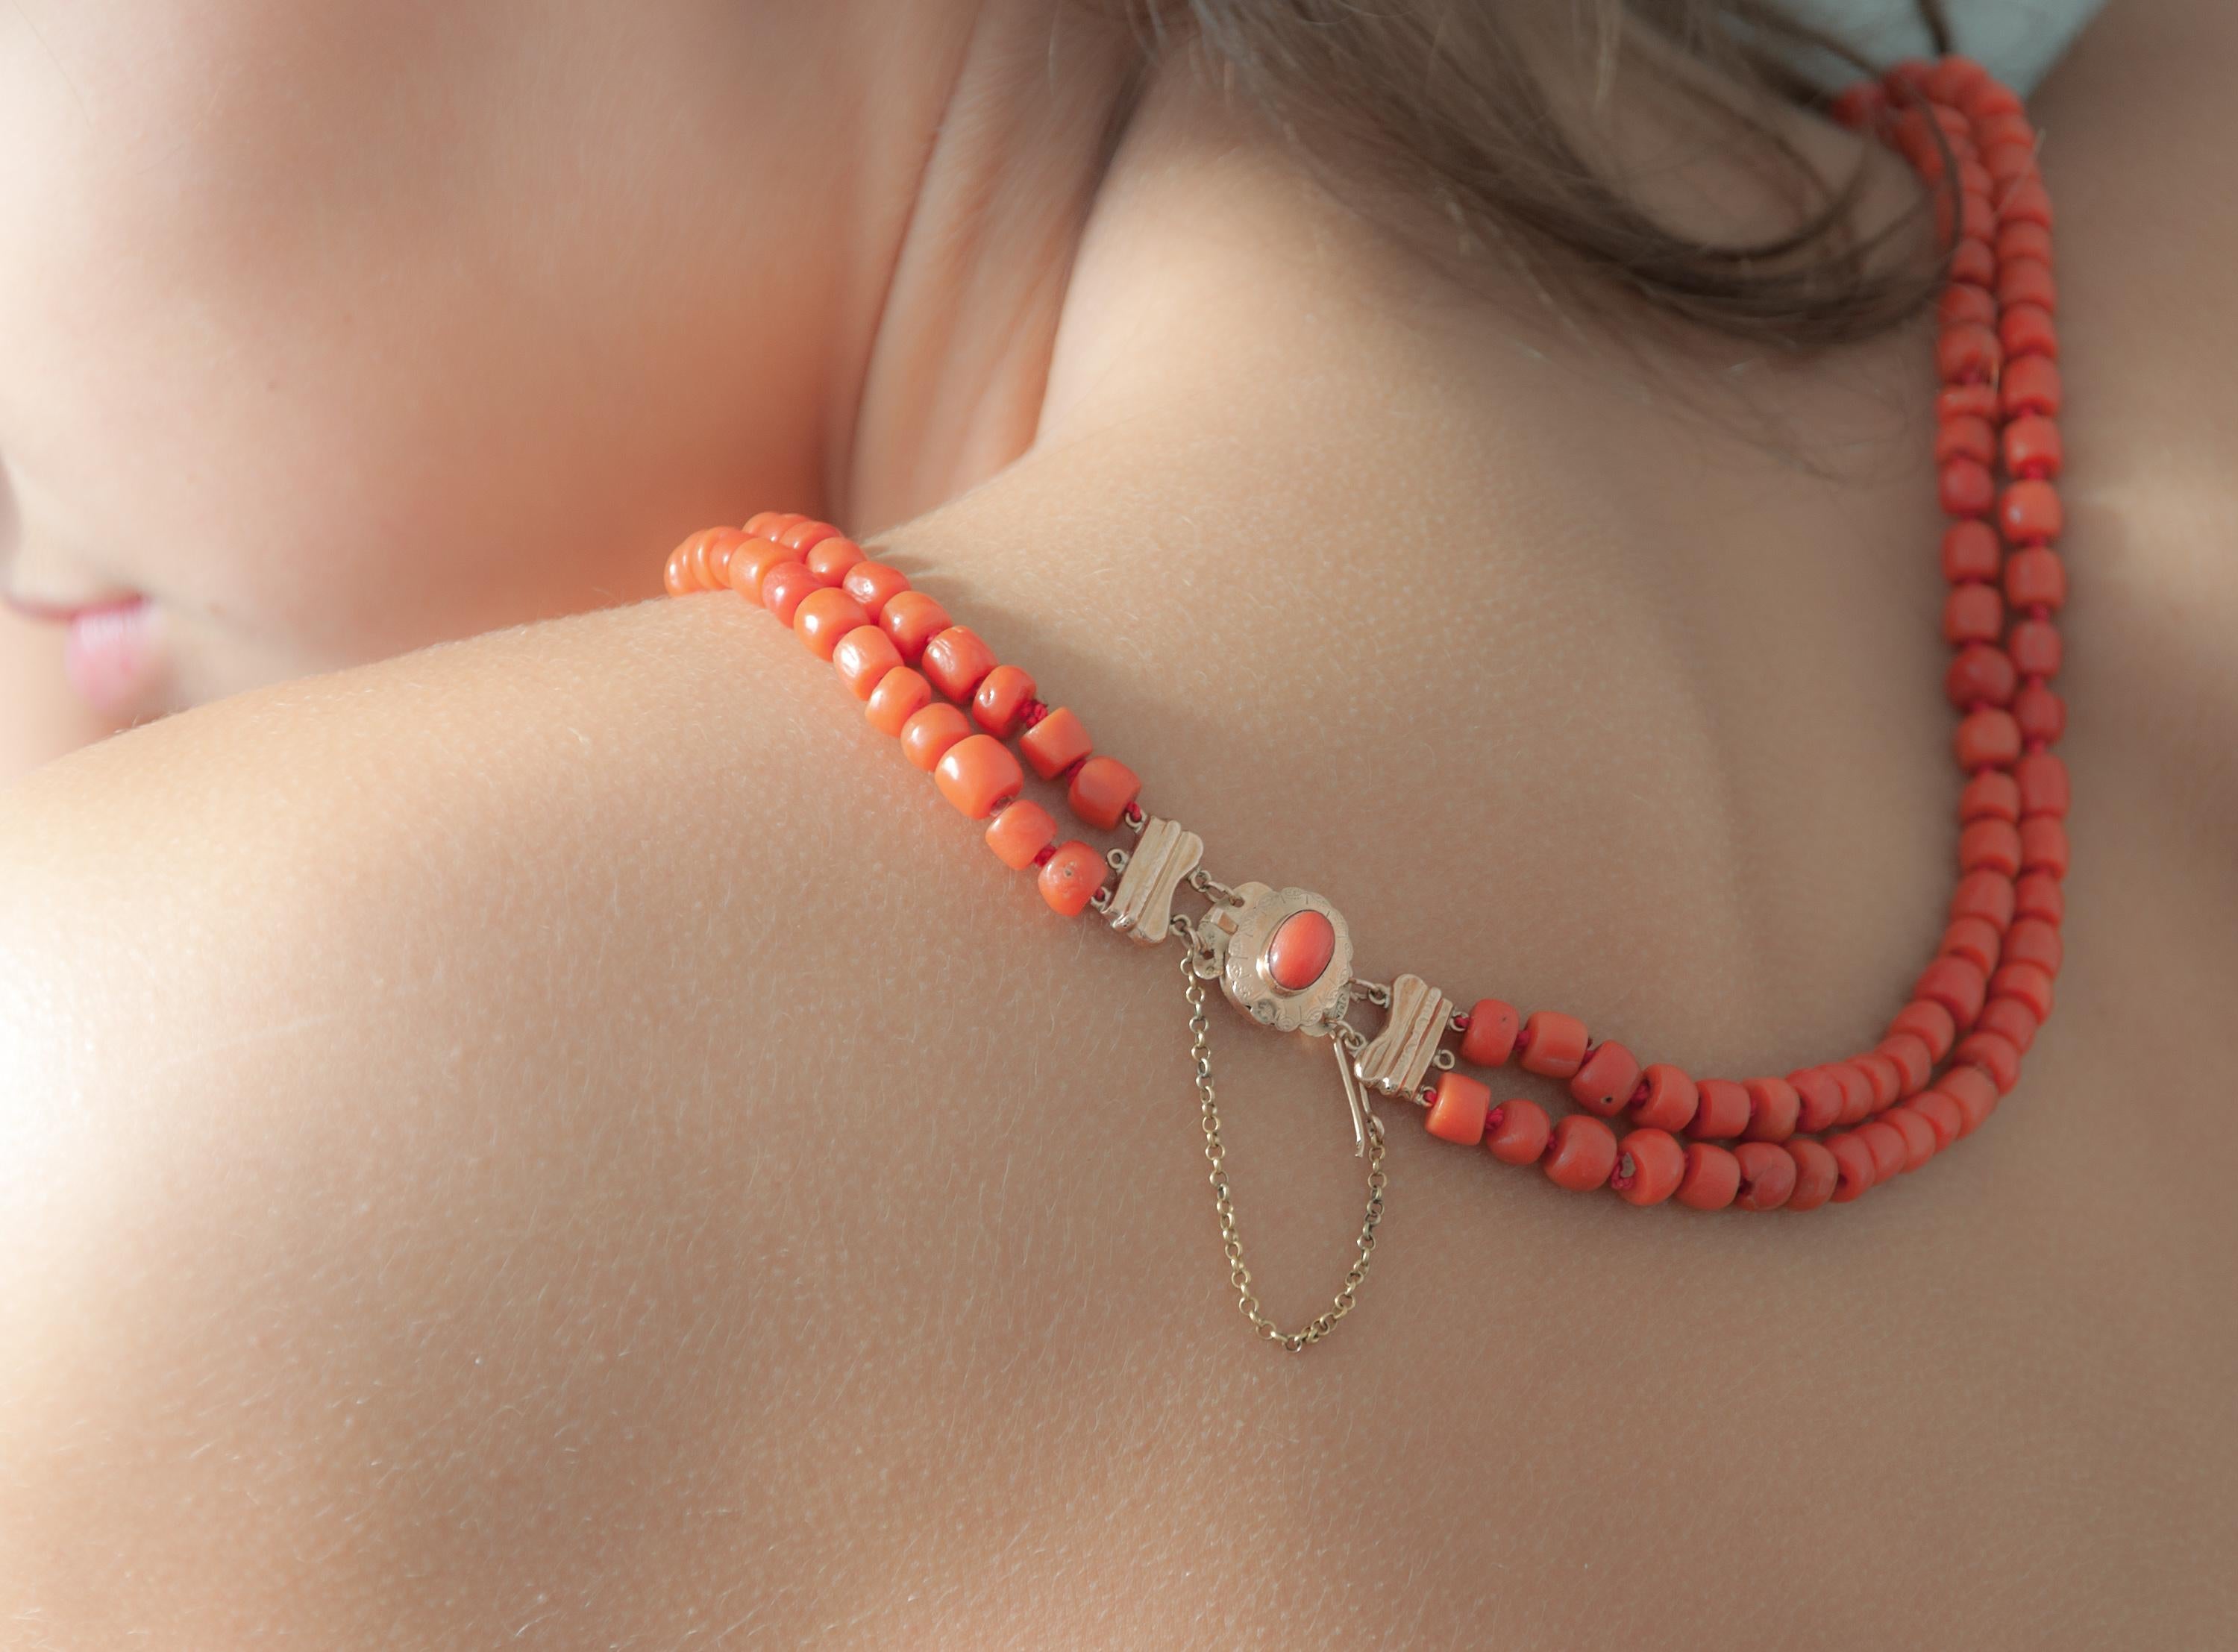 Two-strand coral beaded necklace set with a beautiful oval-shaped gold clasp. The 14k gold clasp is made with an oval cabochon coral stone set in bezel setting. The coral beads are barrel-shaped and the cord is beautifully knotted between each